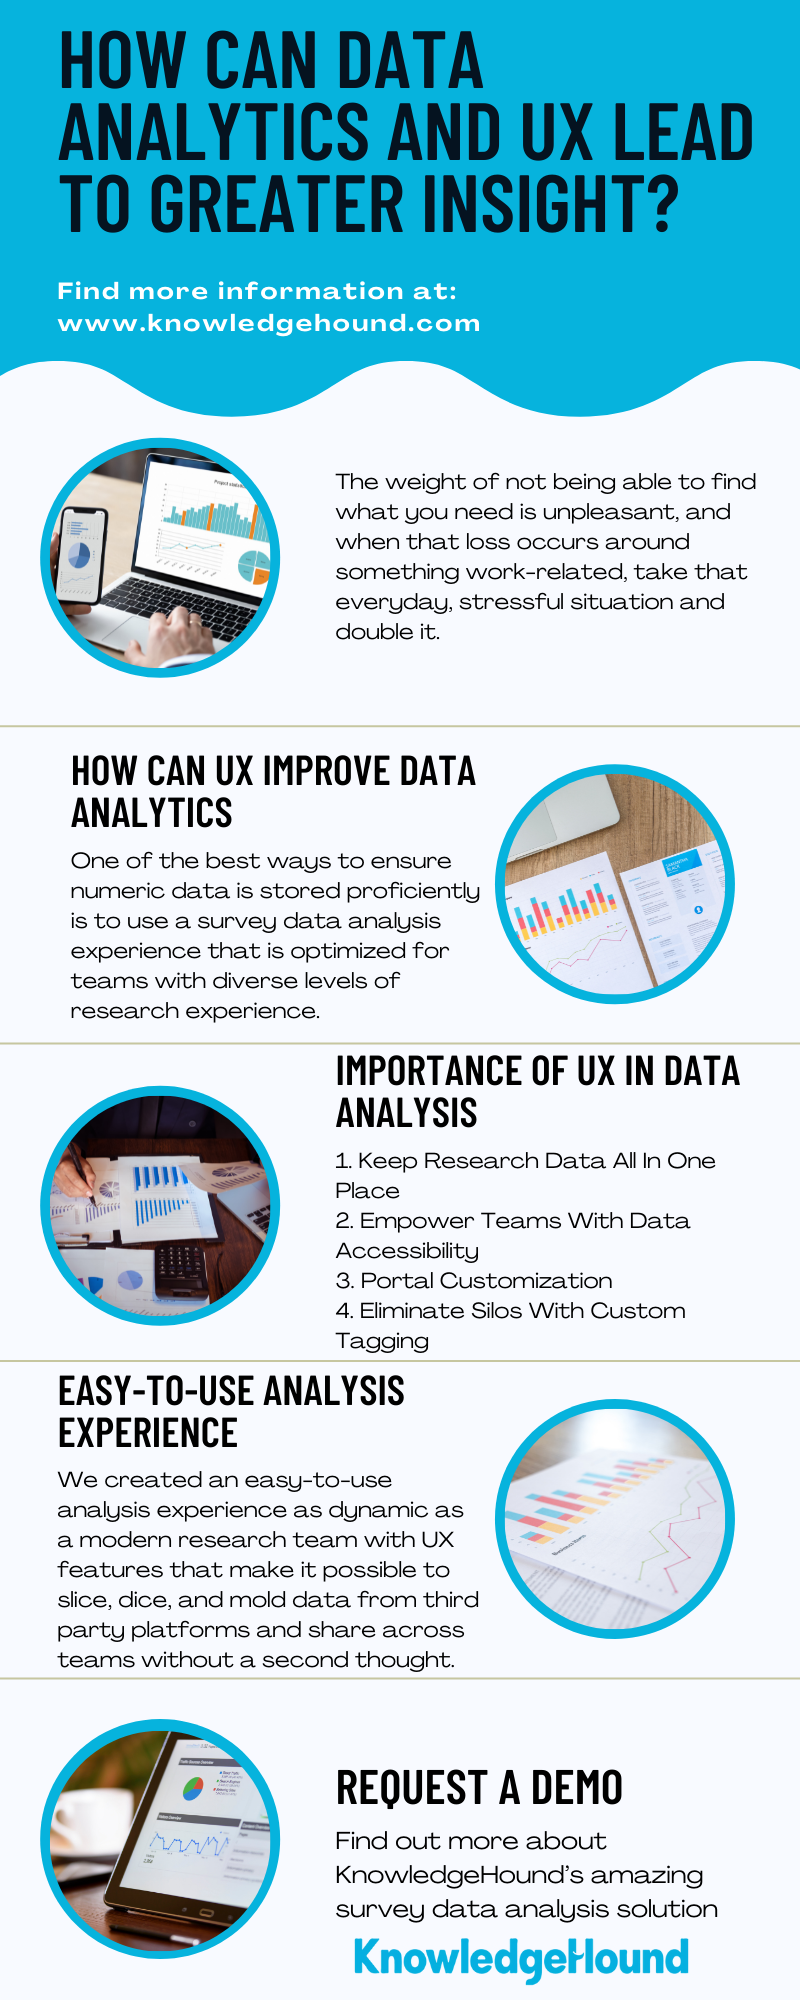 How Can Data Analytics and UX Lead to Greater Insight